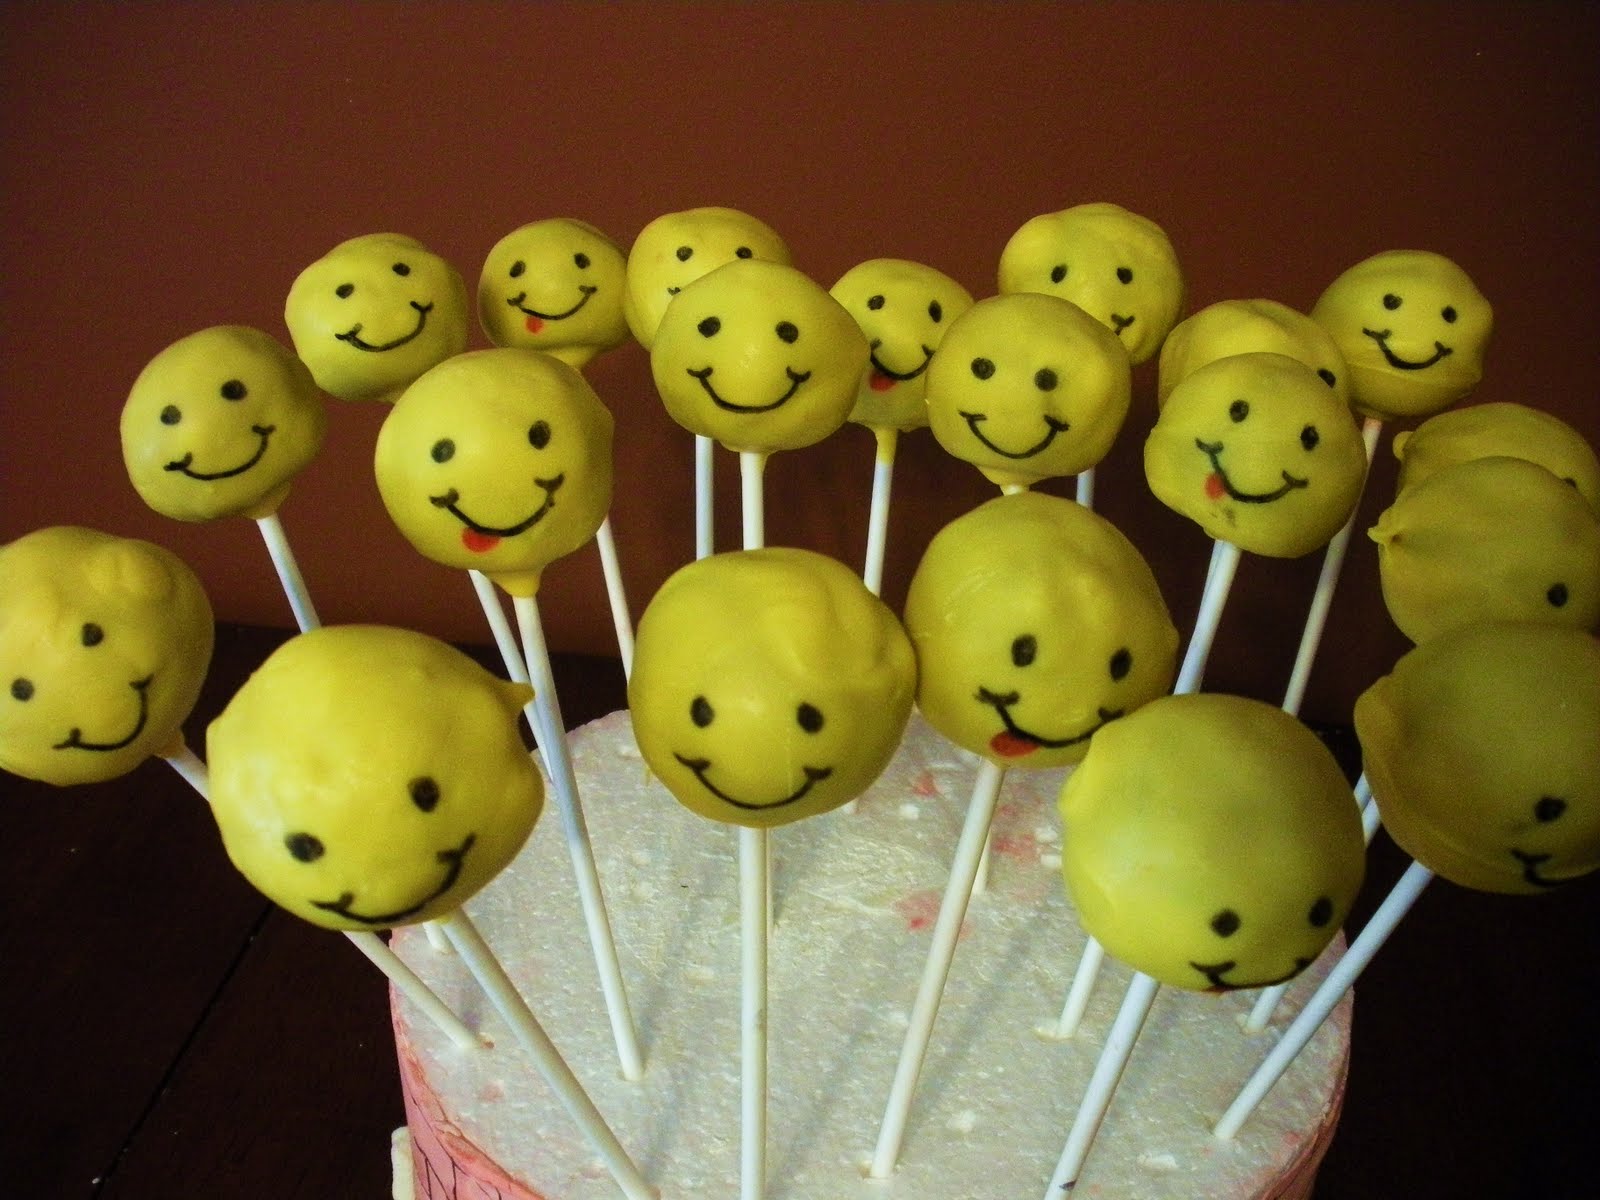 Sugar &amp; Spice Sweets: Smiley Face Cake Pops